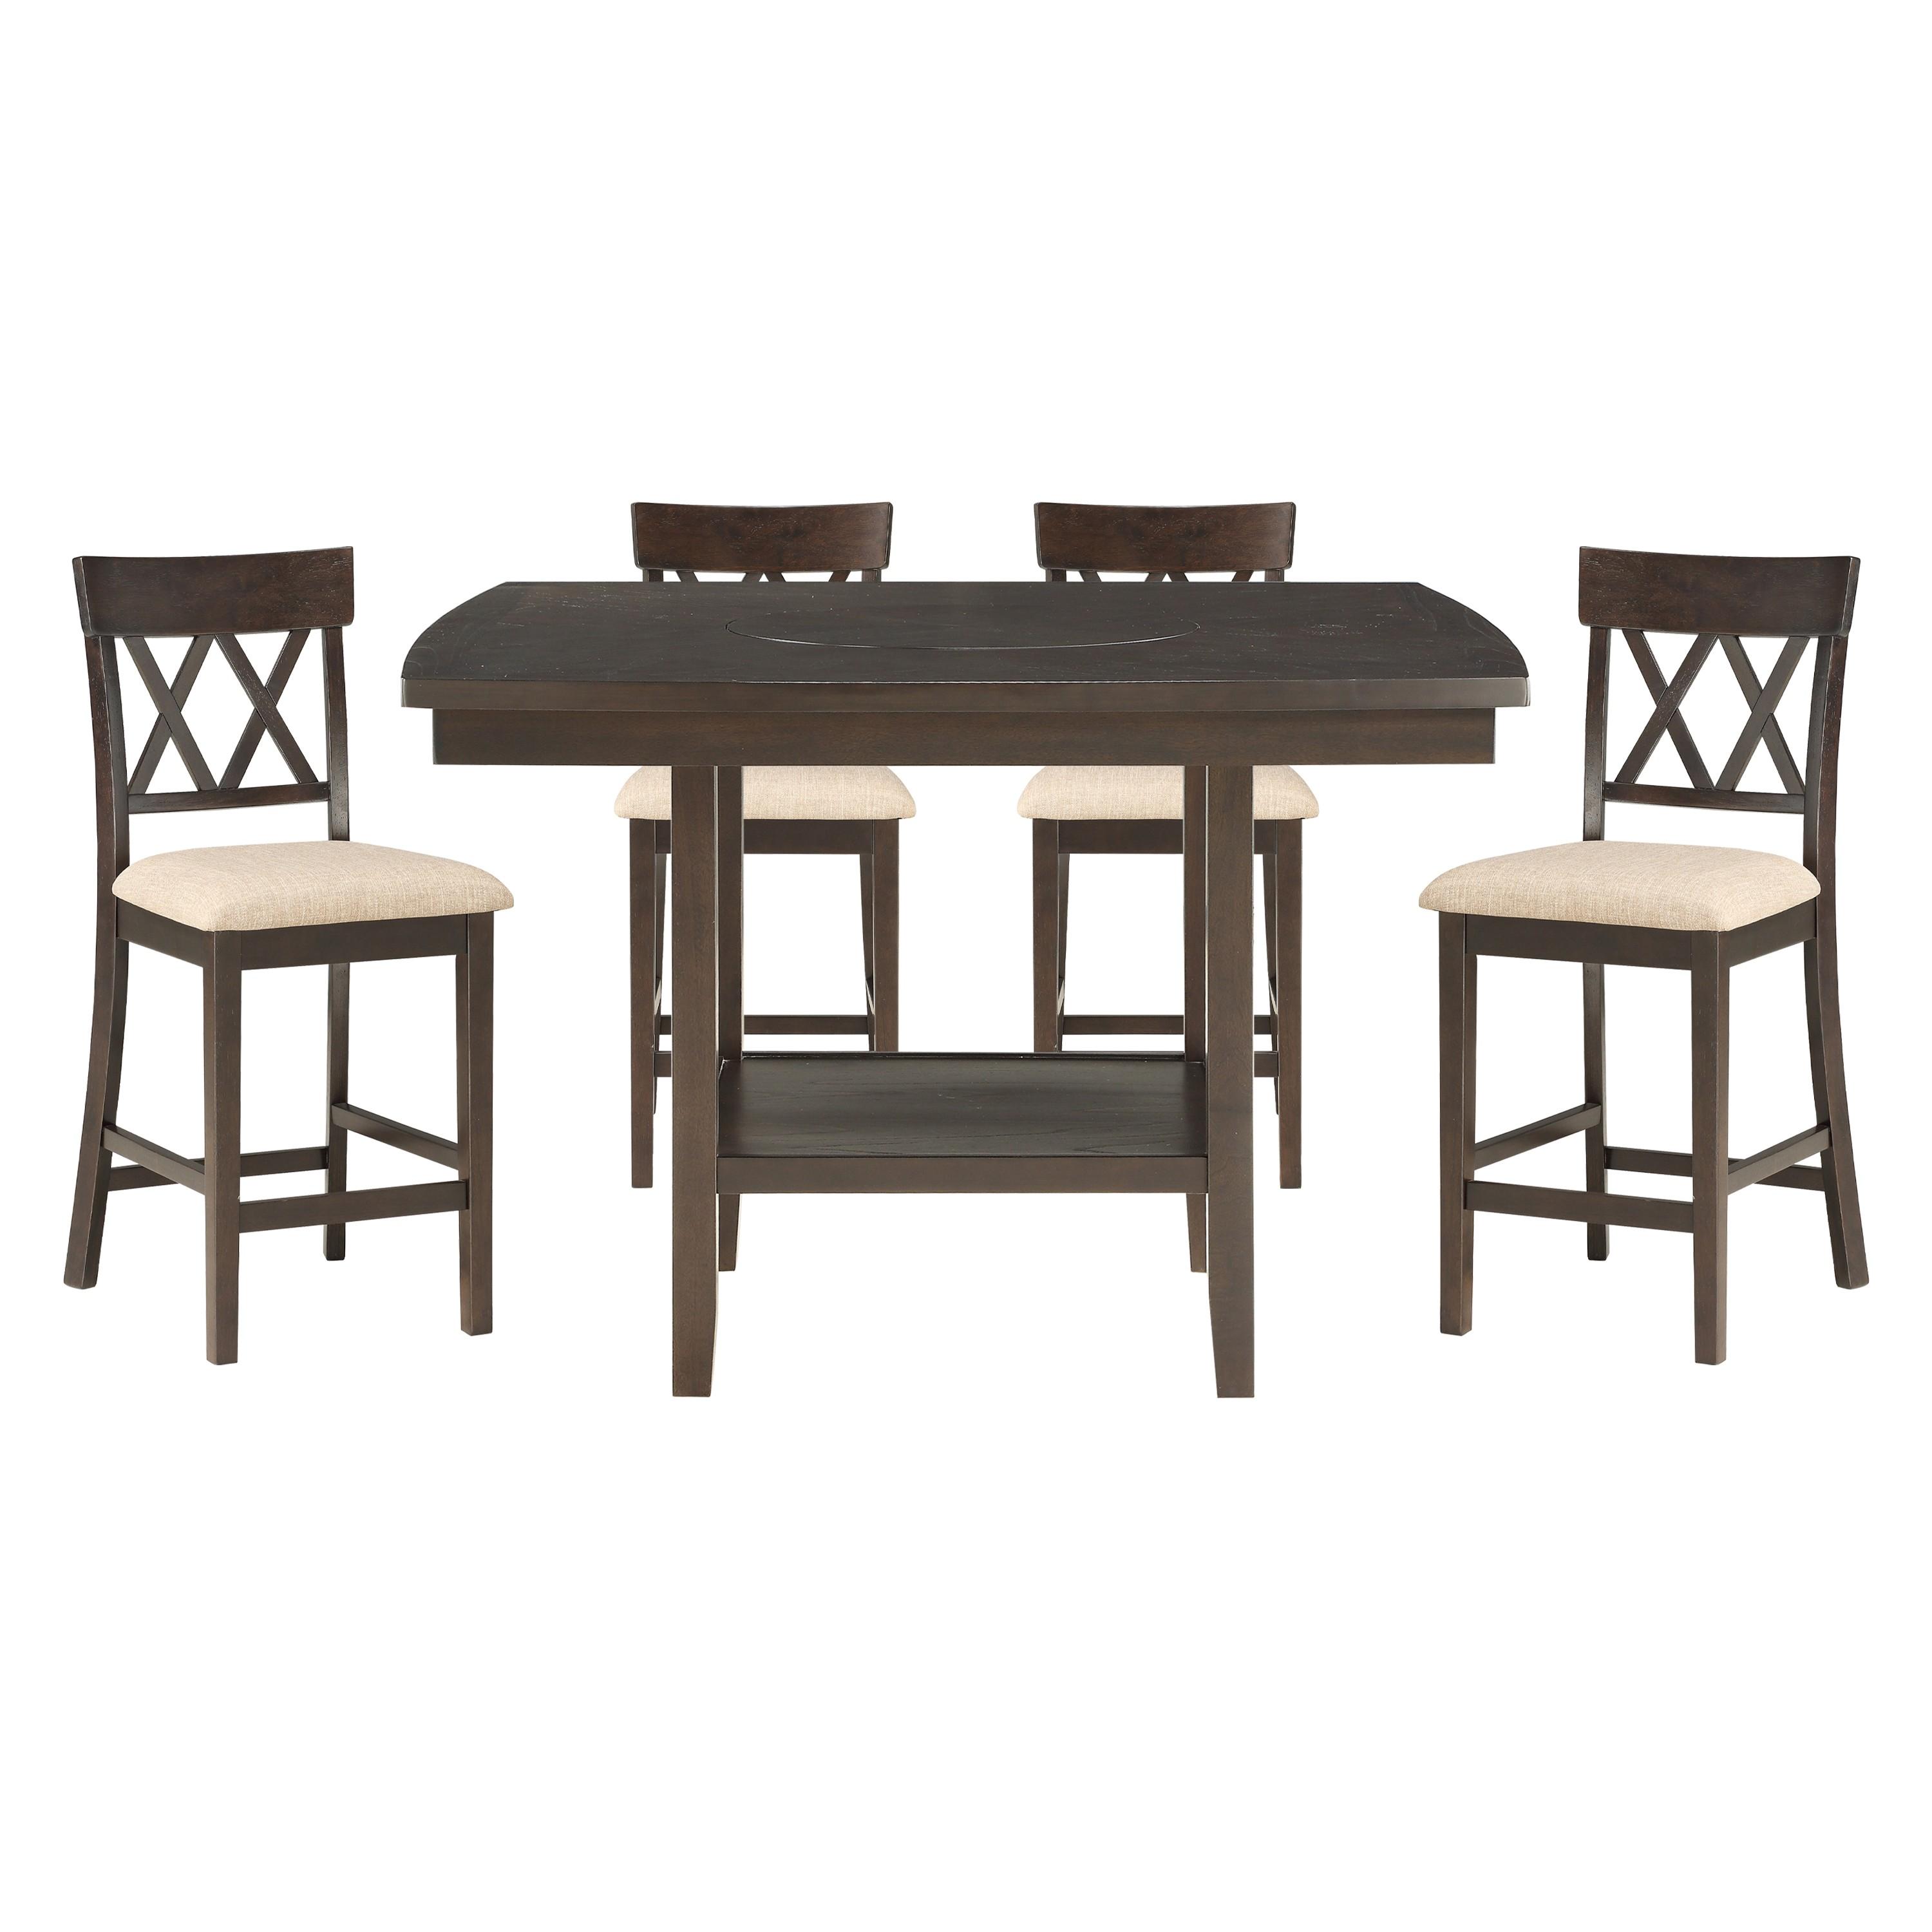 Rustic Counter Height Set 5716-36-S2*5PC Balin 5716-36-S2*5PC in Dark Brown Polyester